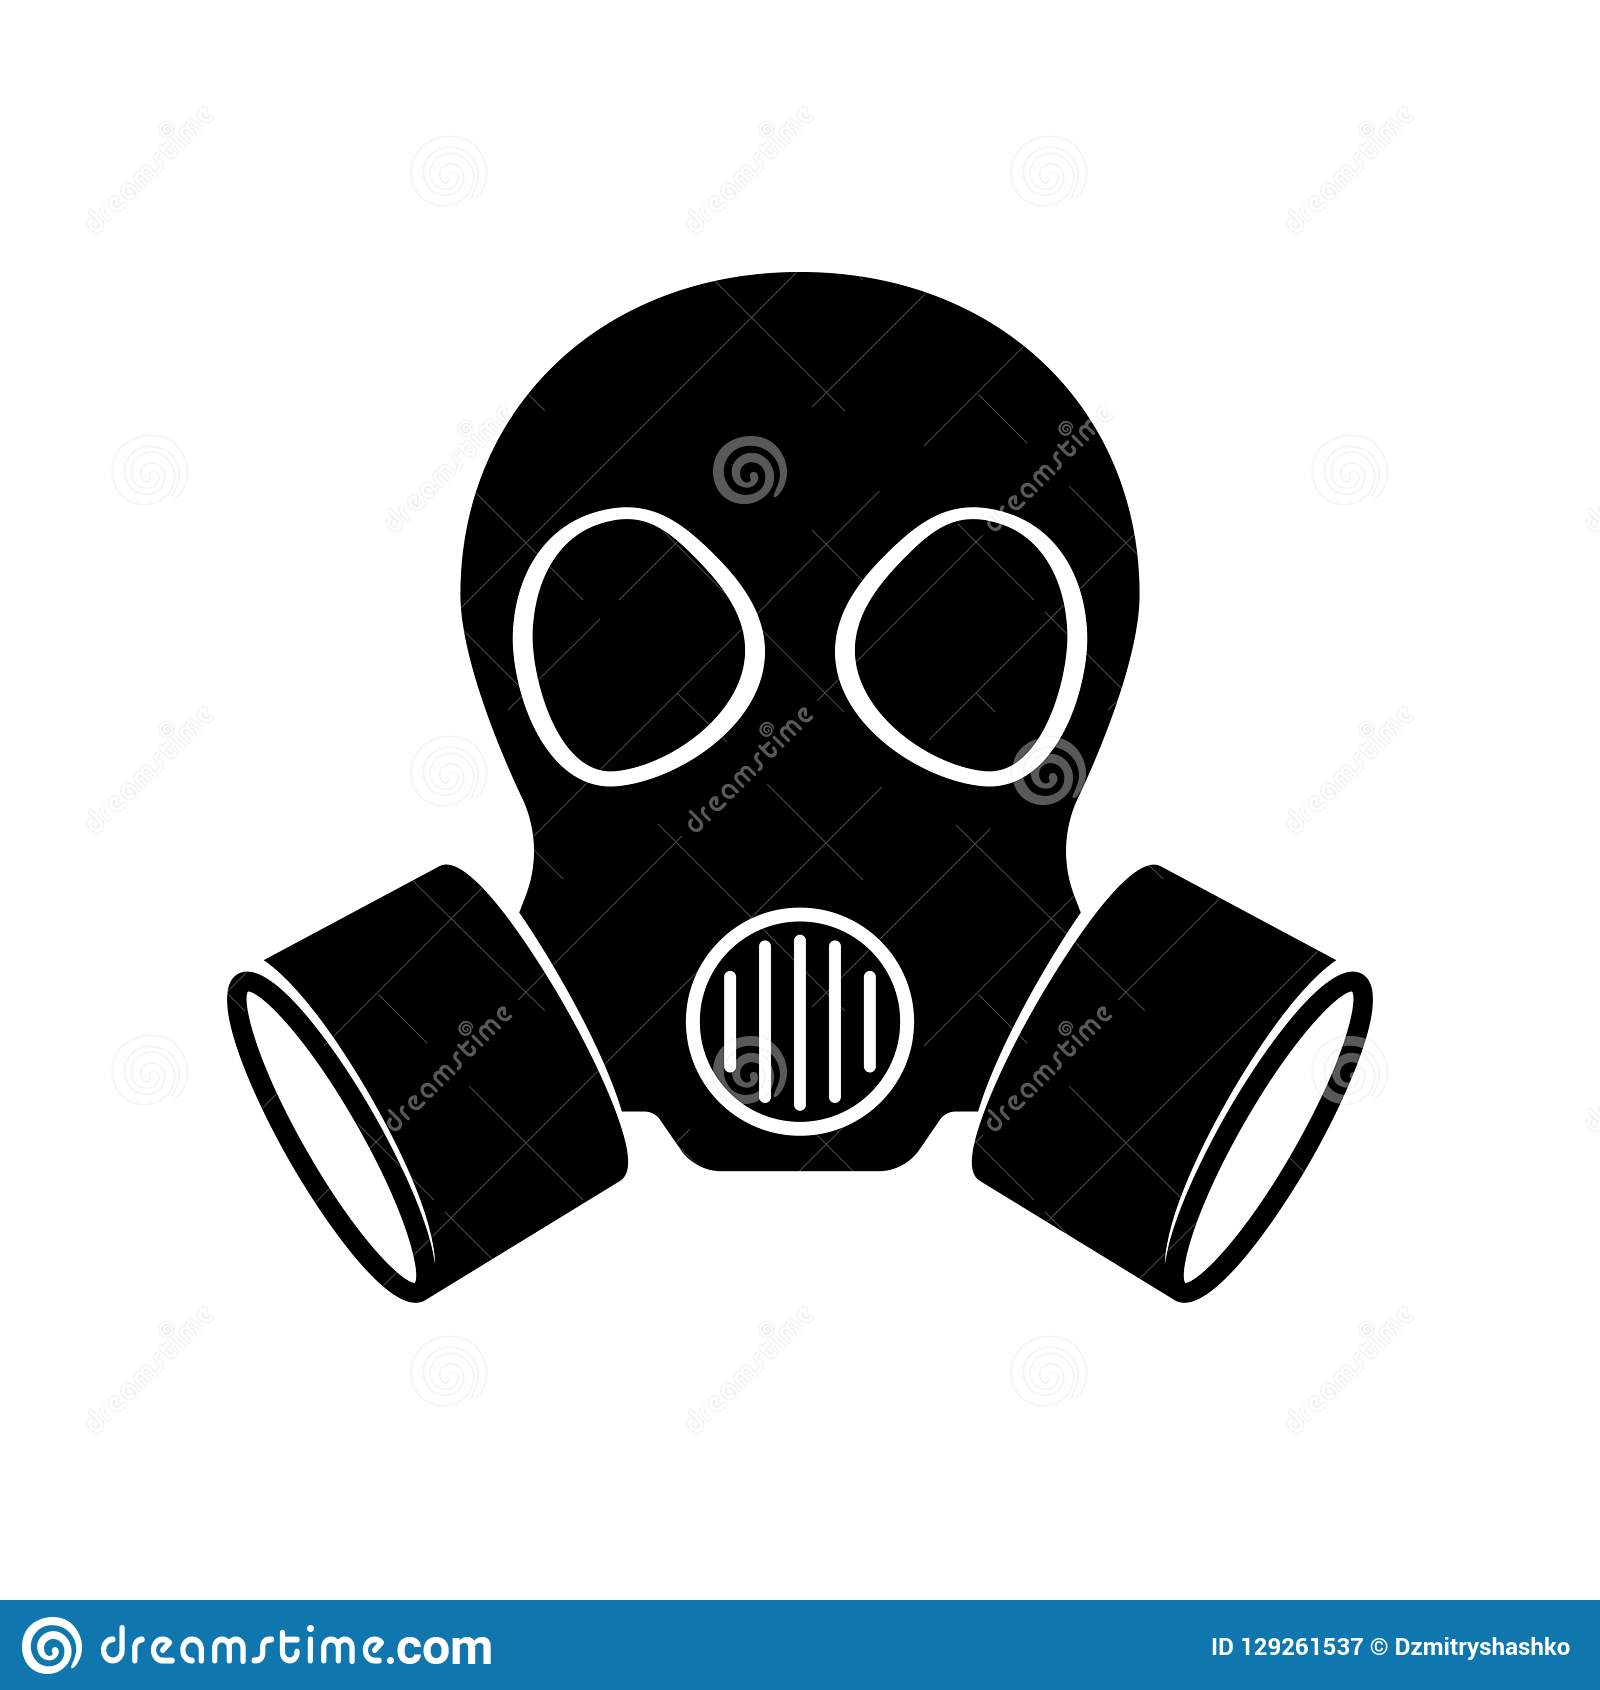 Gas mask silhouette icon stock vector. Illustration of military.